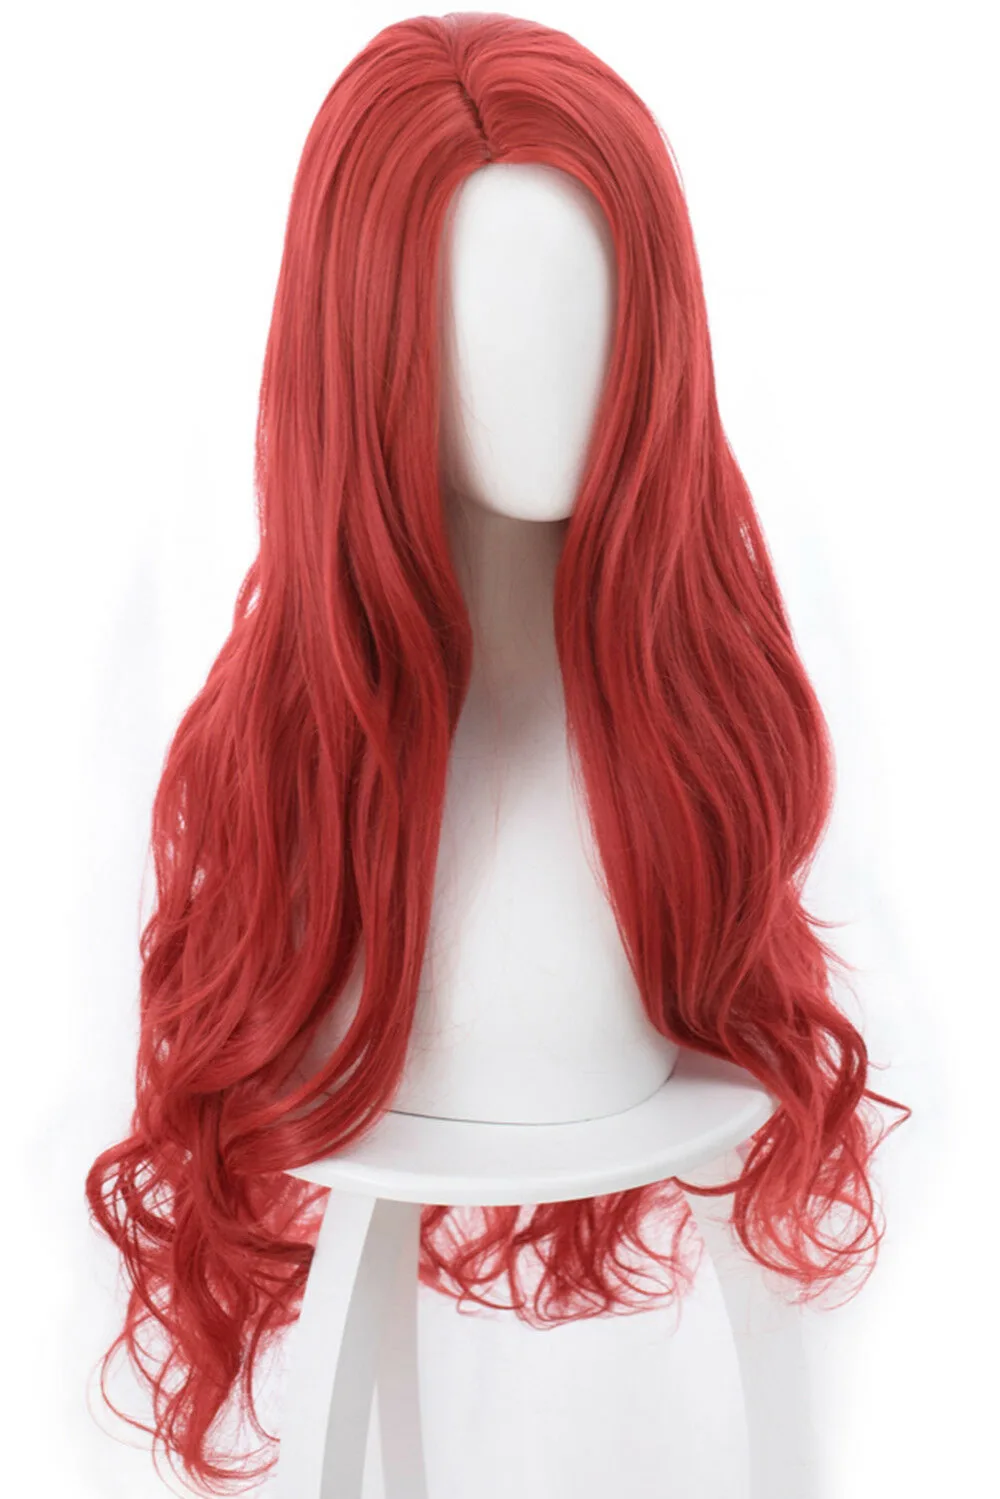 

Movie Aquaman Mera Cosplay Wig 85cm Red Long Curly Wavy Heat Resistant Synthetic Hair Women Party Wig + Wig Cap